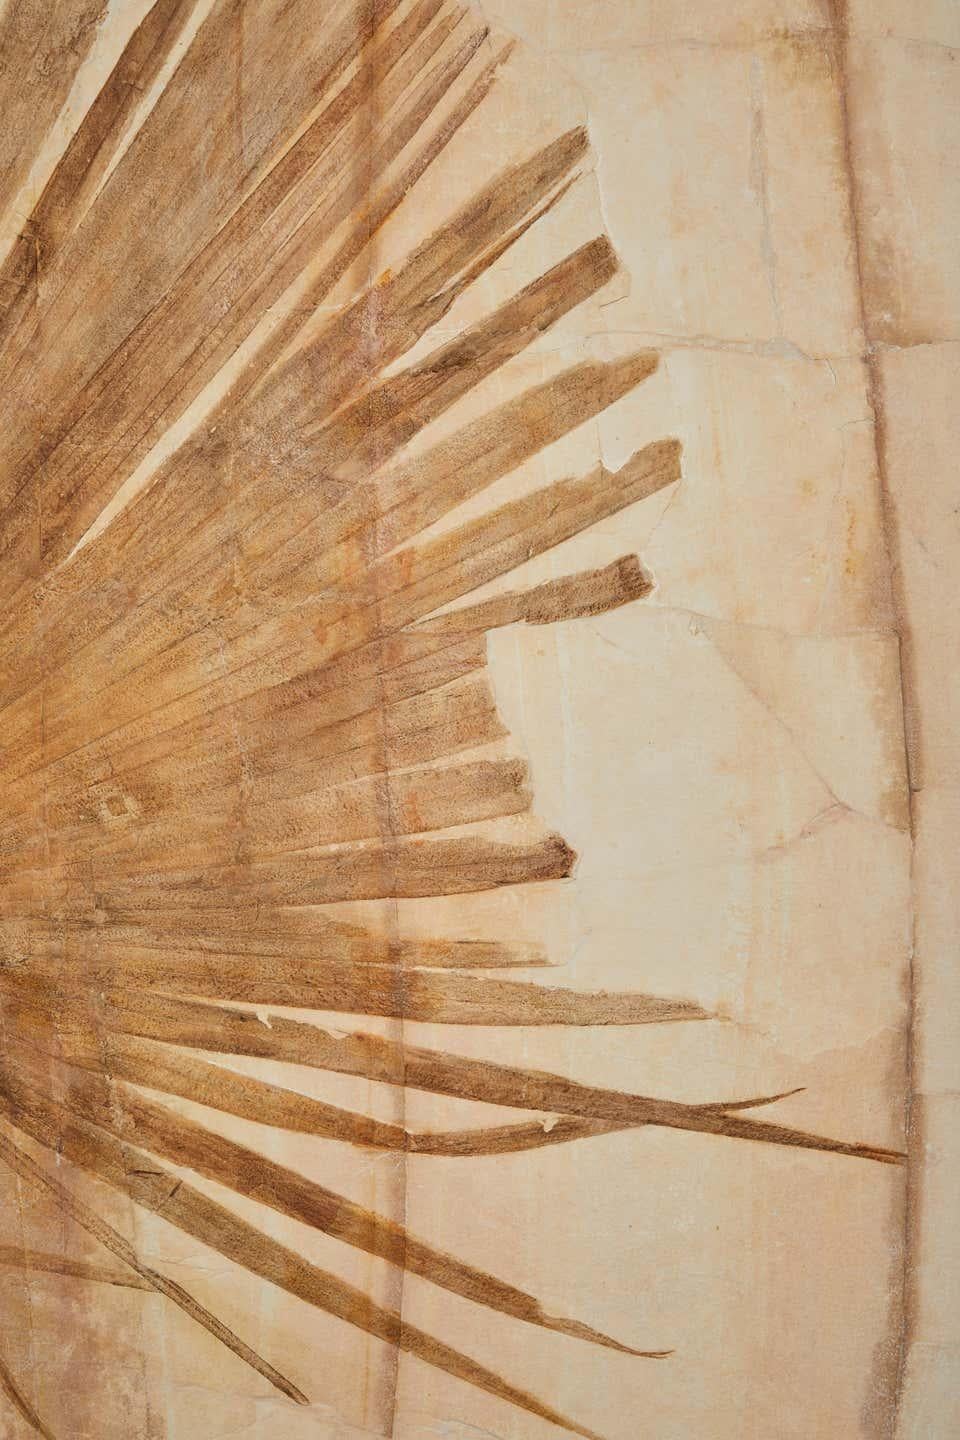 50 Million Year Old Eocene Era Fossil Palm Frond Mural in Stone, from Wyoming 1